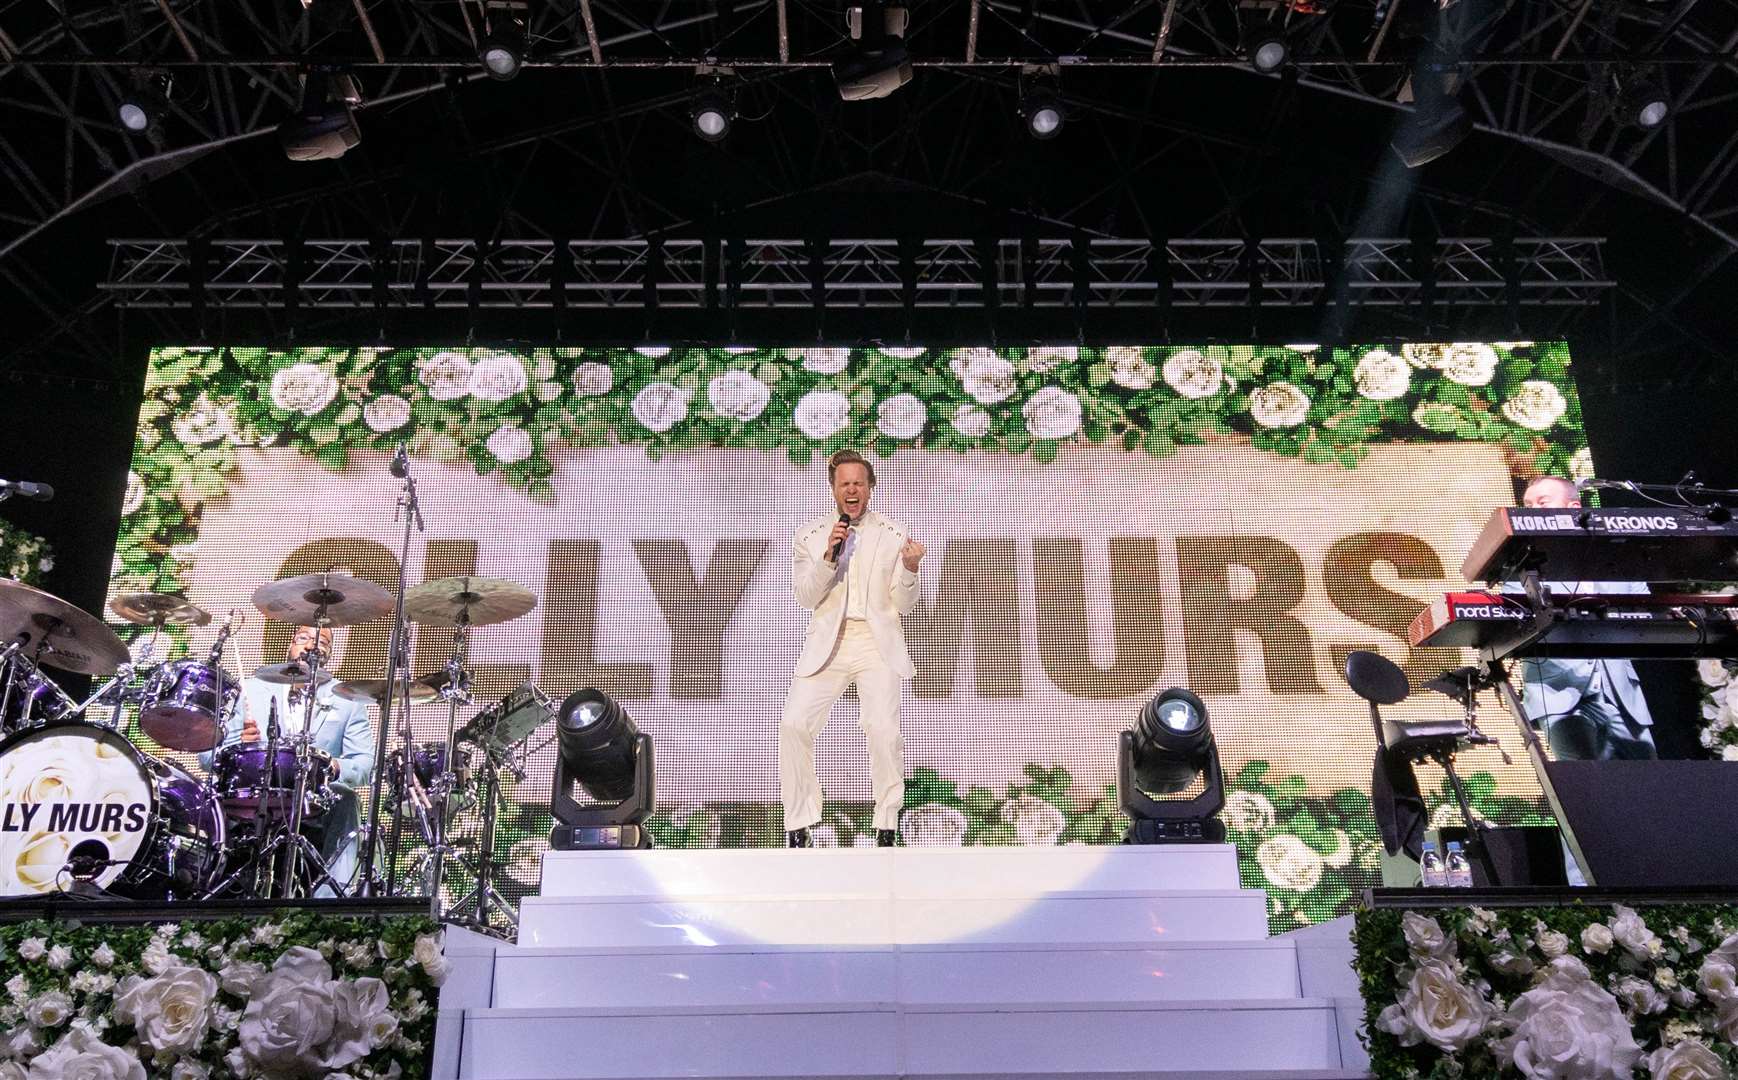 Olly Murs performed a headline set at Dreamland. Picture: Jasmine Marceau